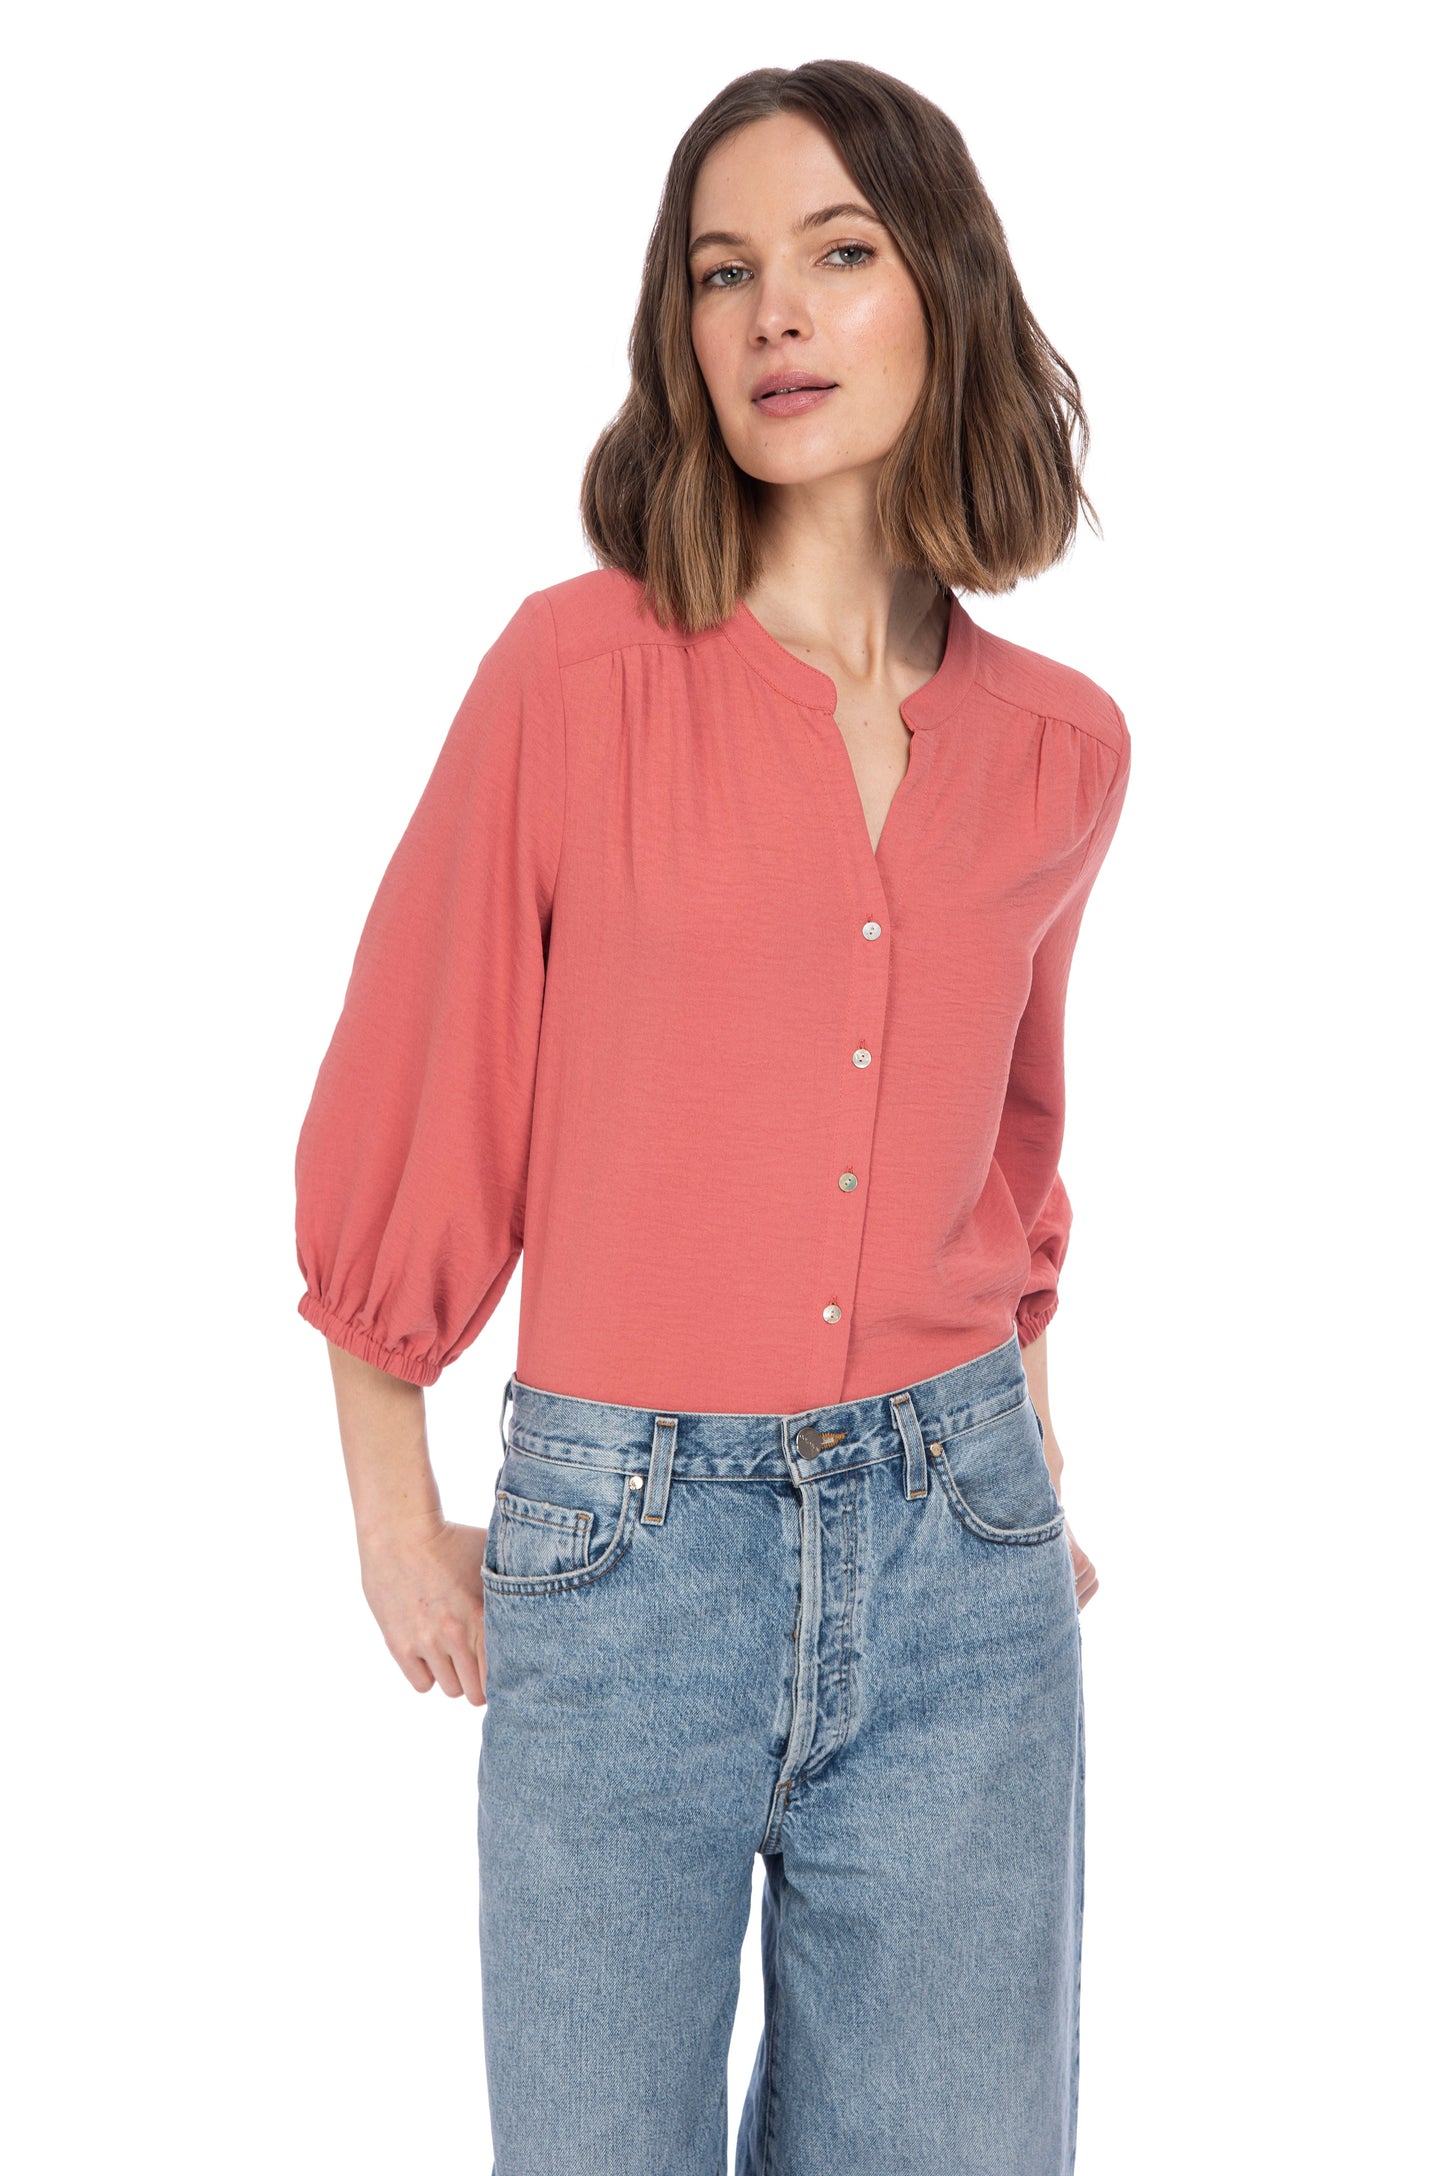 Woman in casual B Collection by Bobeau River Button Up Blouse and blue jeans posing against a white background.